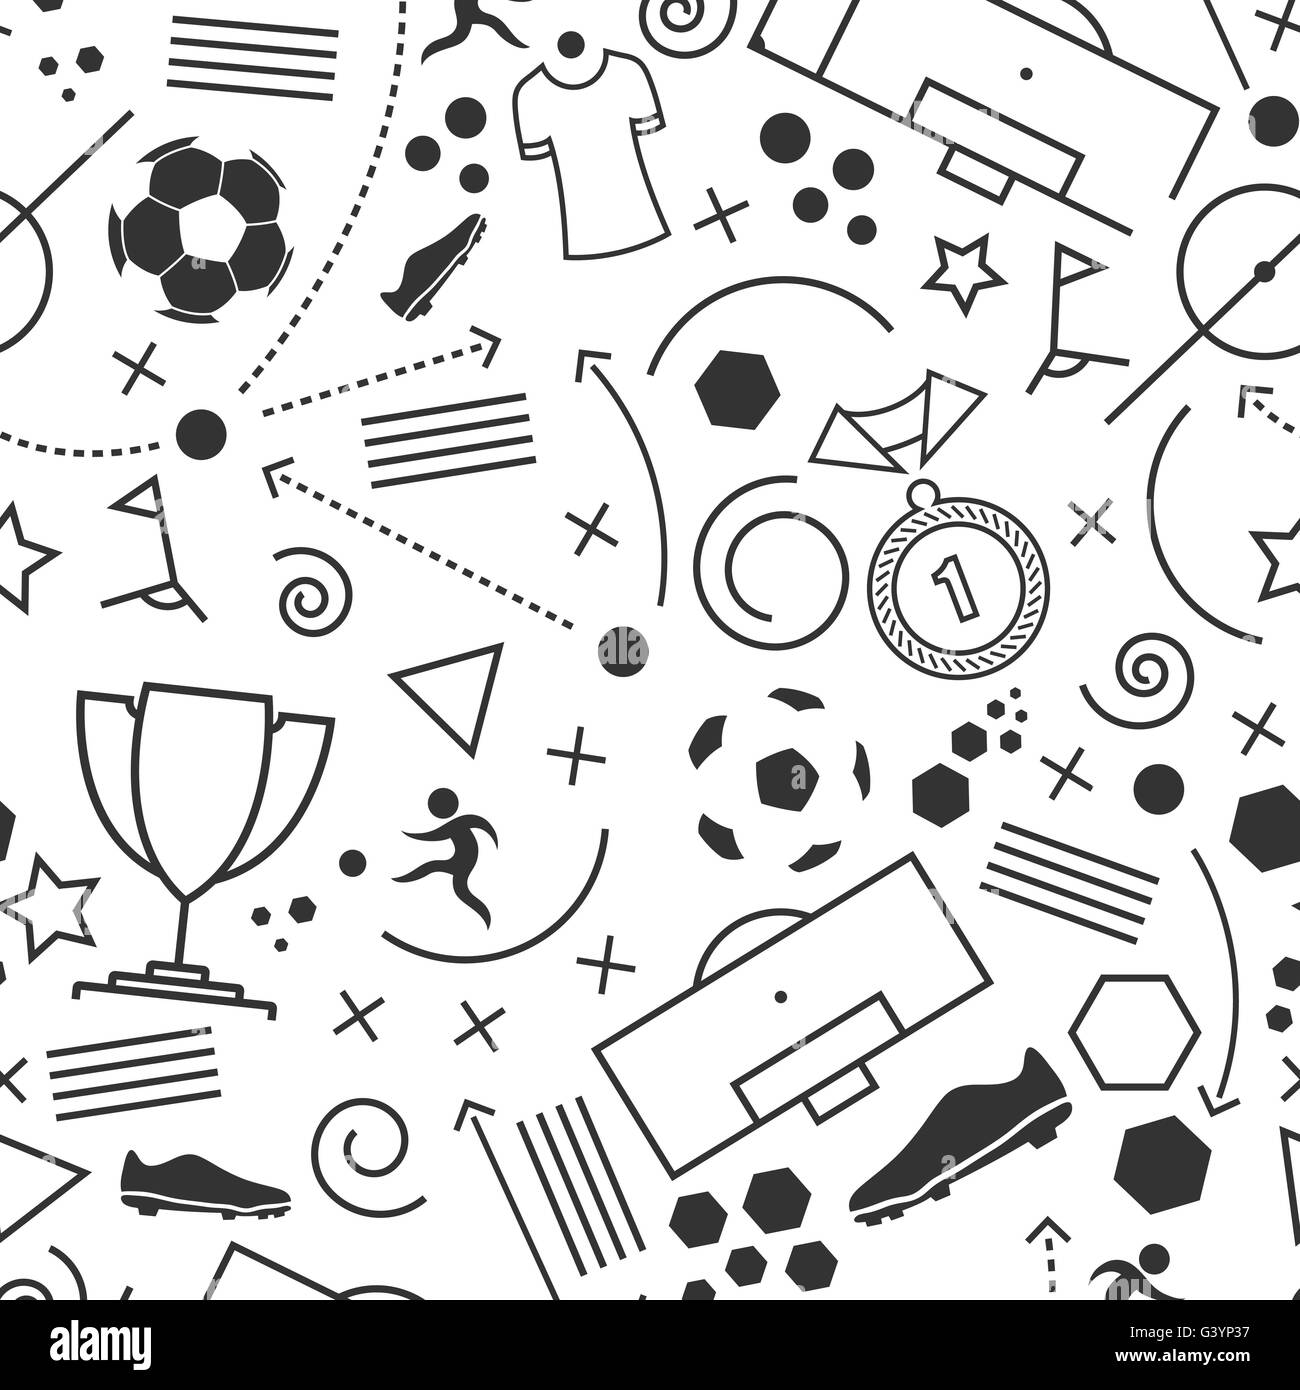 Football icons set. Vector illustration of abstract seamless soccer wallpaper pattern for your design Stock Vector